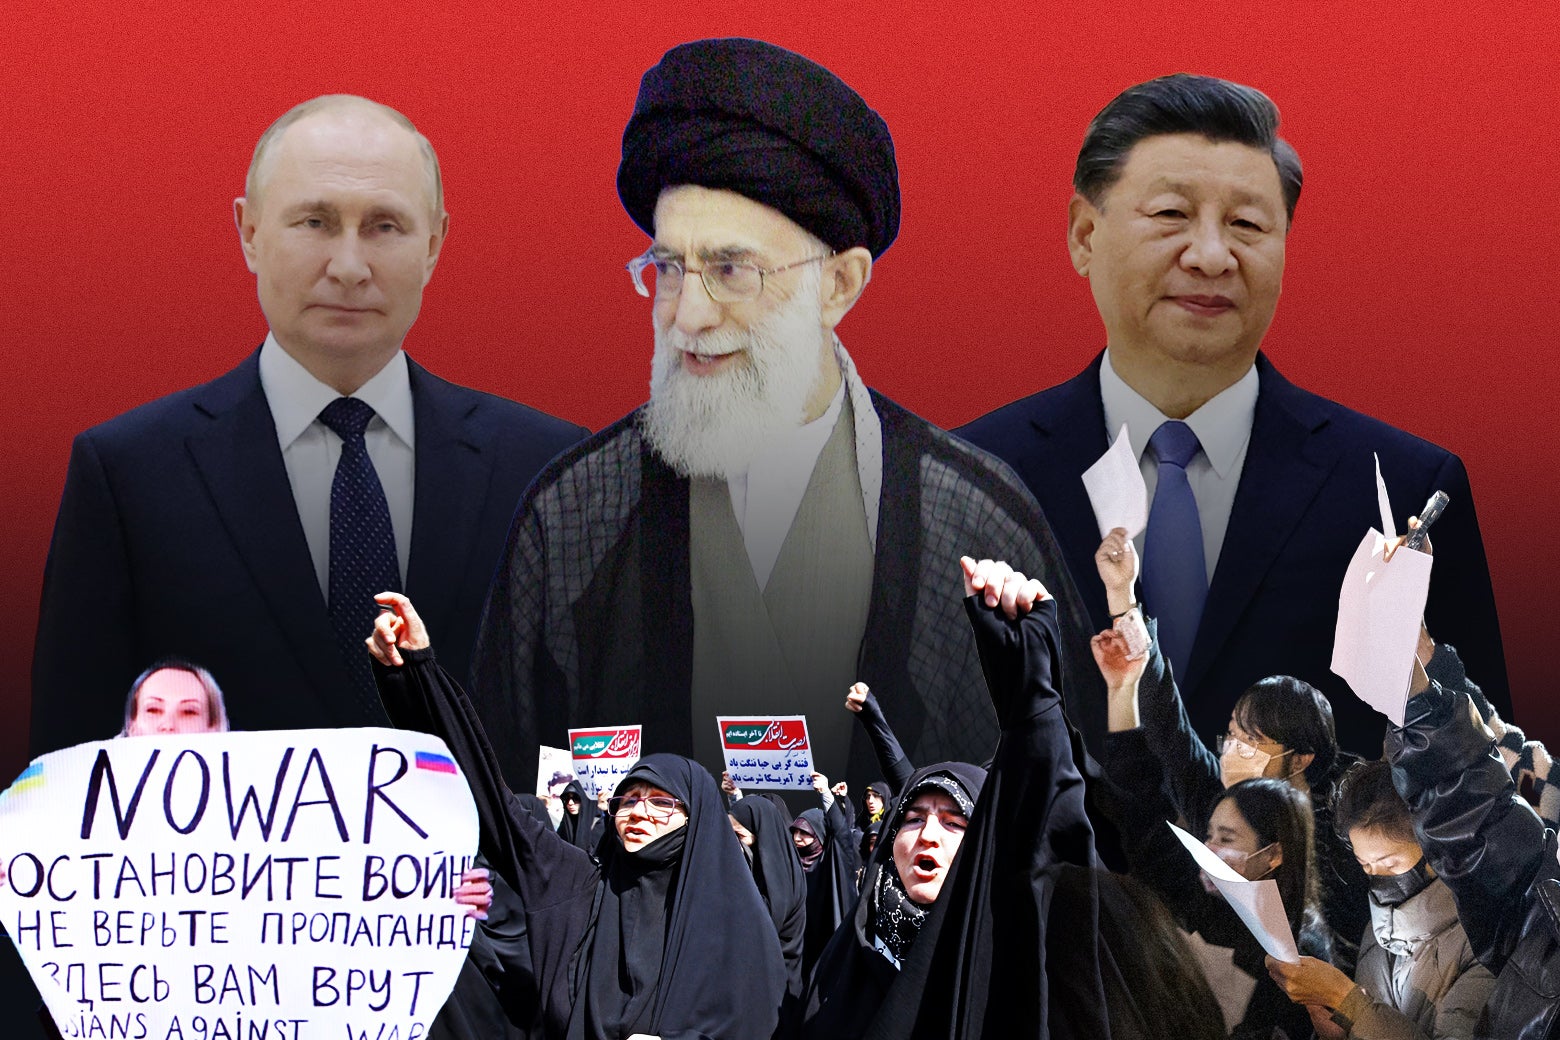 Images of Ayatollah Ali Khamenei in Iran, Vladimir Putin in Russia, and Xi Jinping in China, foregrounded by protesters.